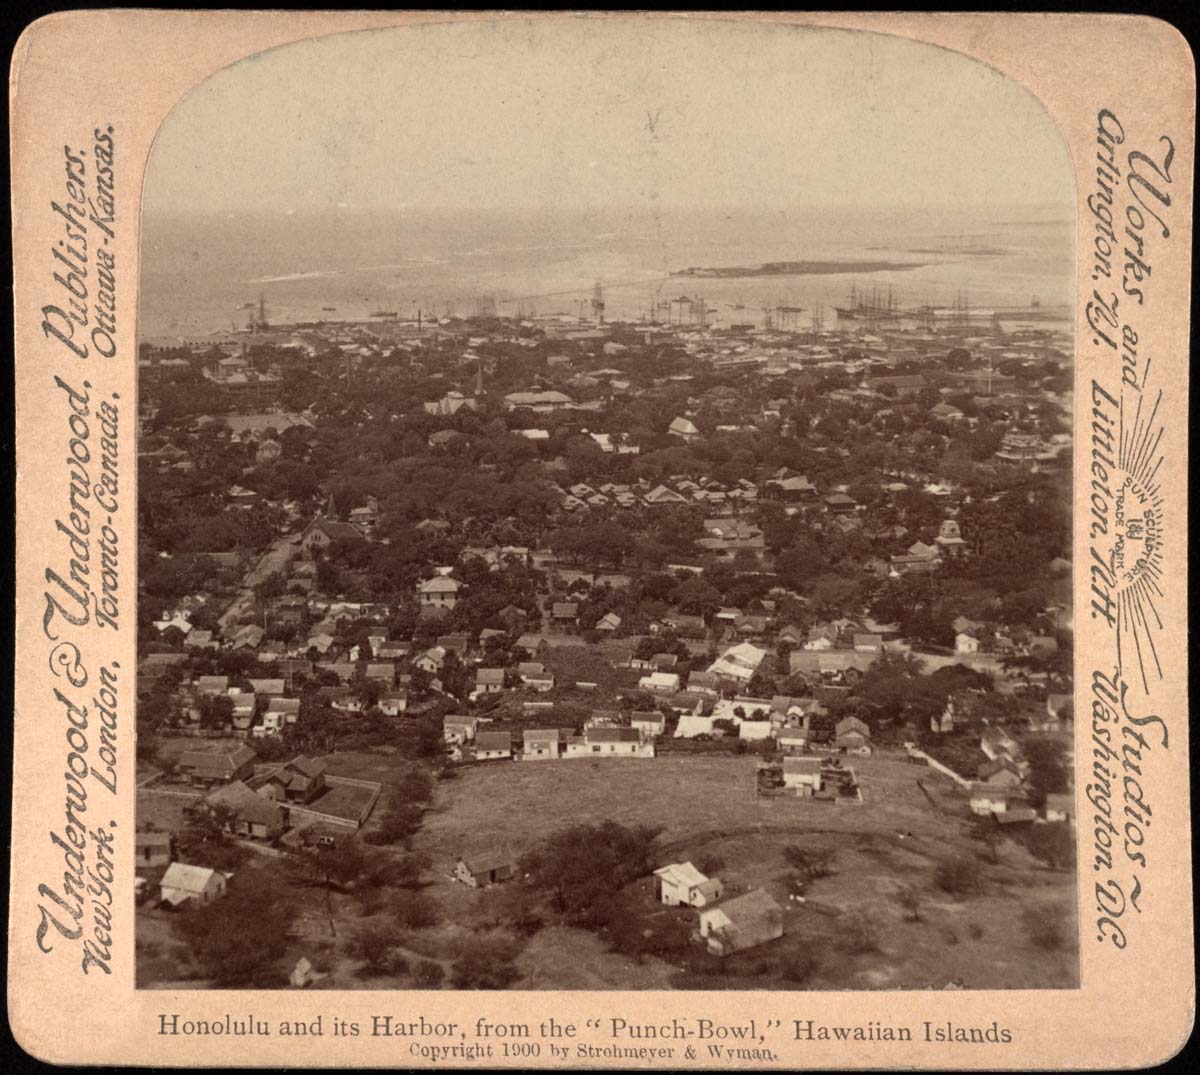 View to Honolulu and its harbor from the 'Punch Bowl', 1900